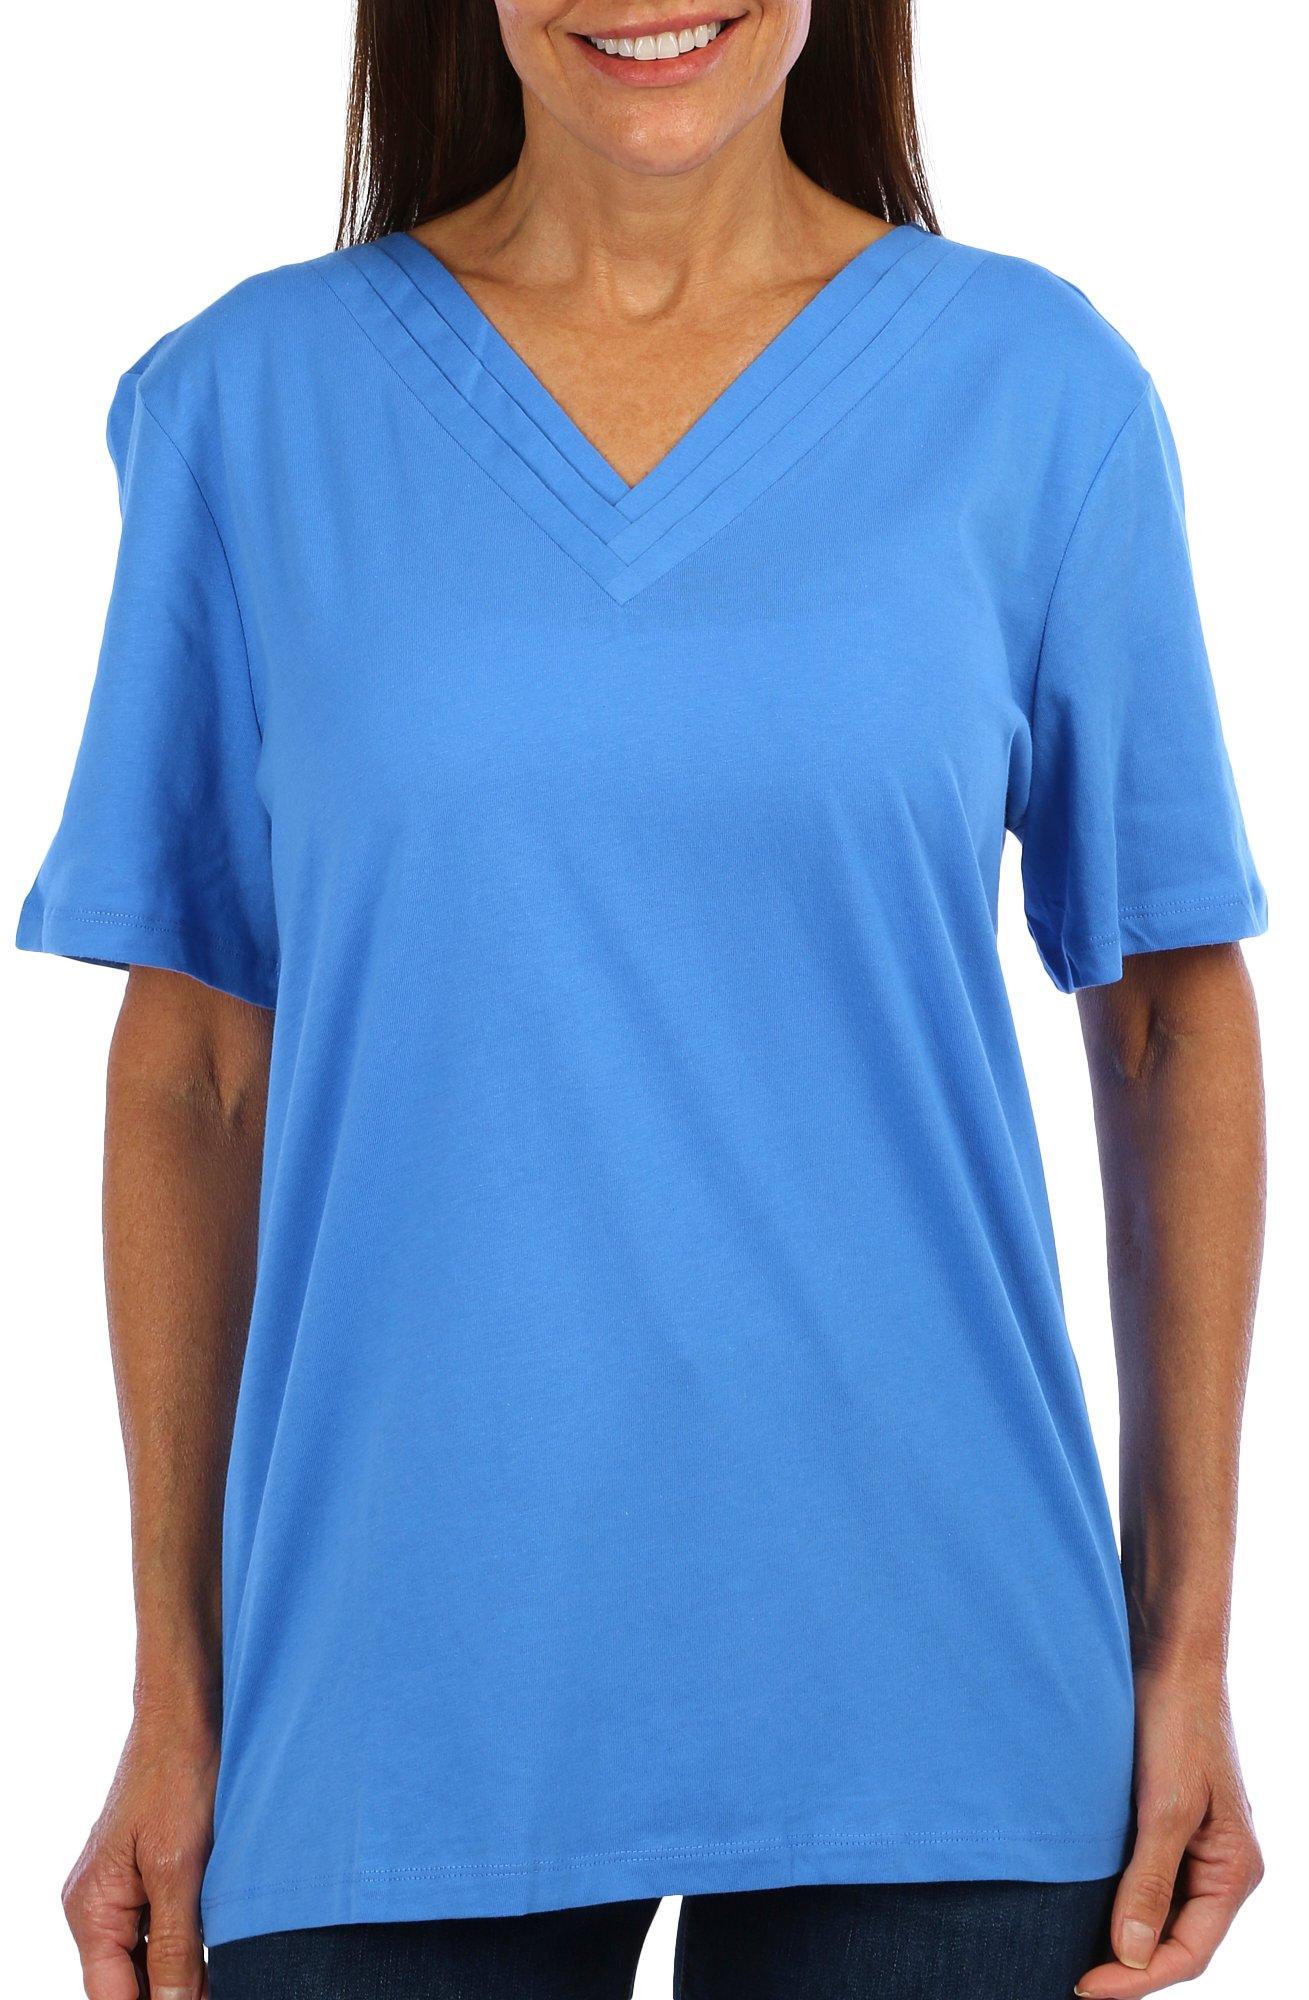 Coral Bay Womens Solid Layered V-Neckline Short Sleeve